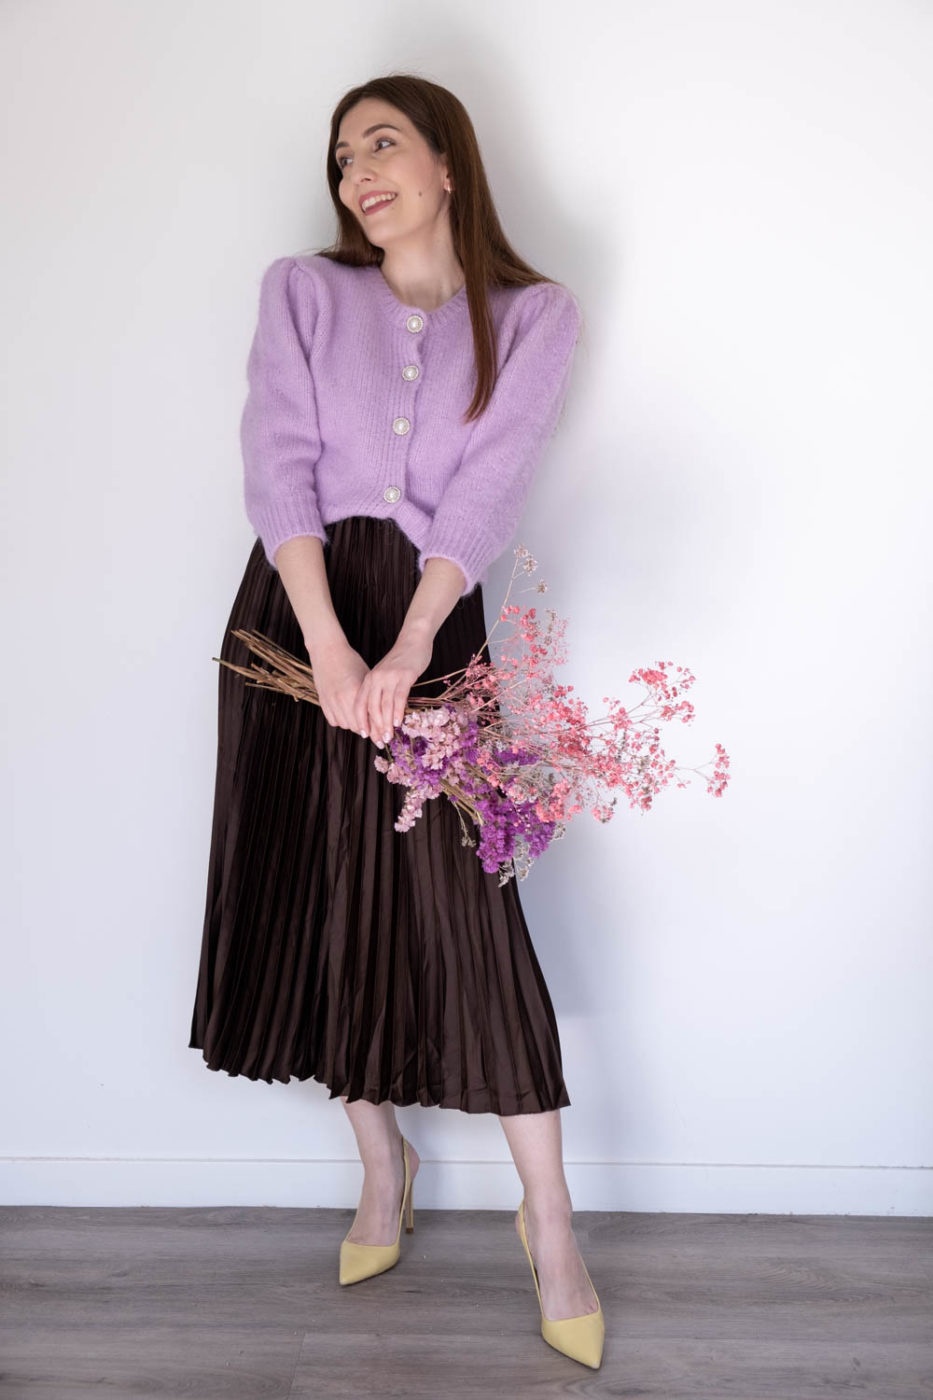 Pleated skirt & dresses trend ss2022 - The Colourful Bouquet